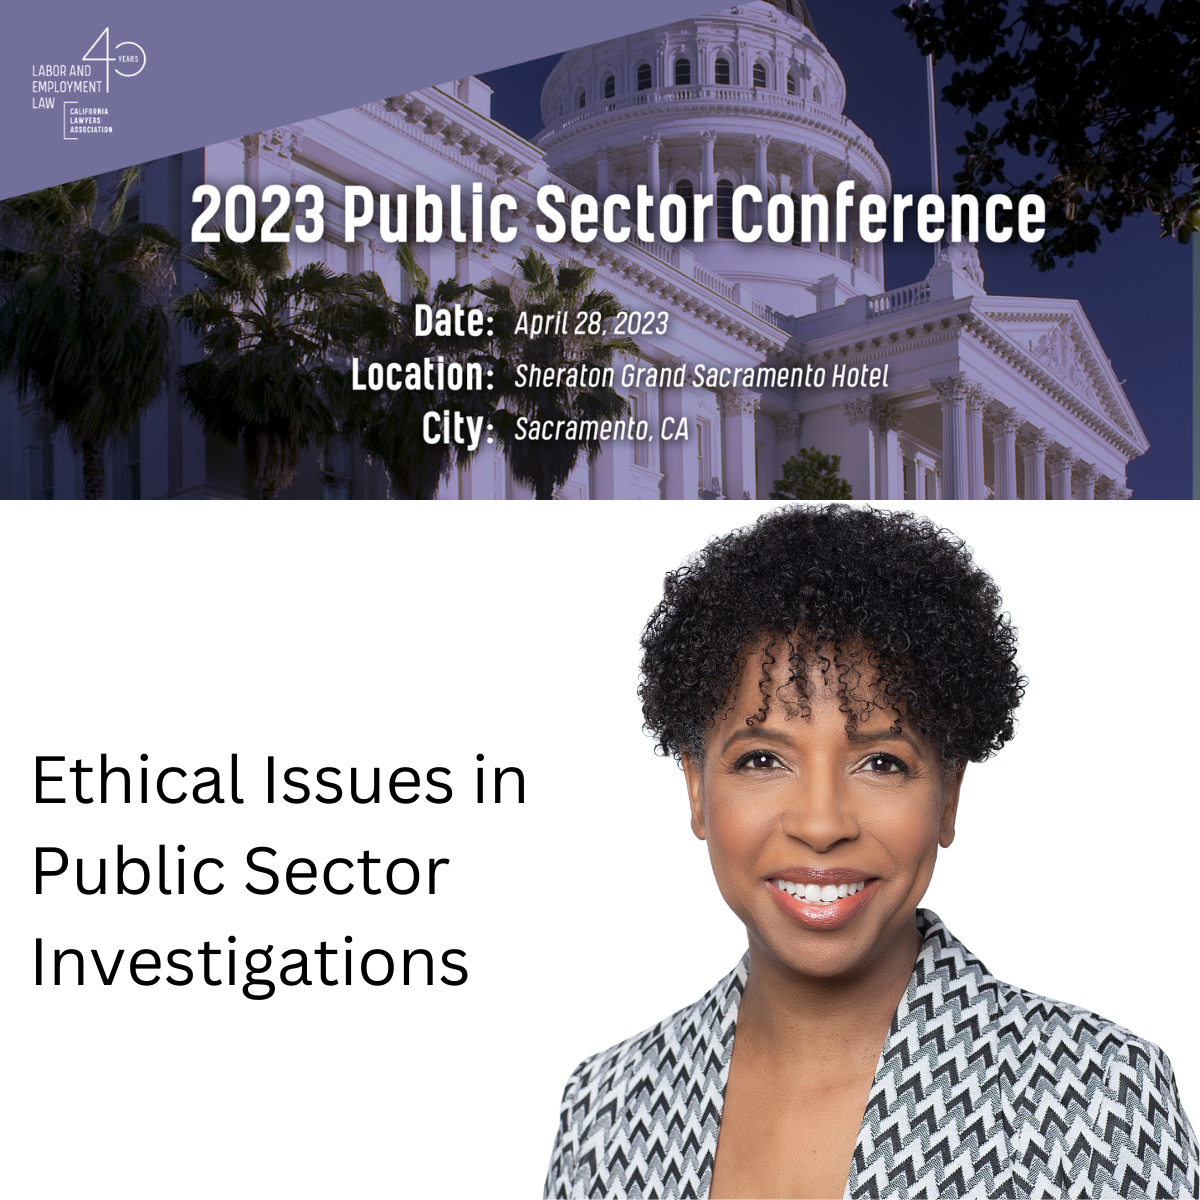 Vida Thomas speaking on Ethical Issues in Public Sector Investigations at the CLA 2023 Public Sector Conference